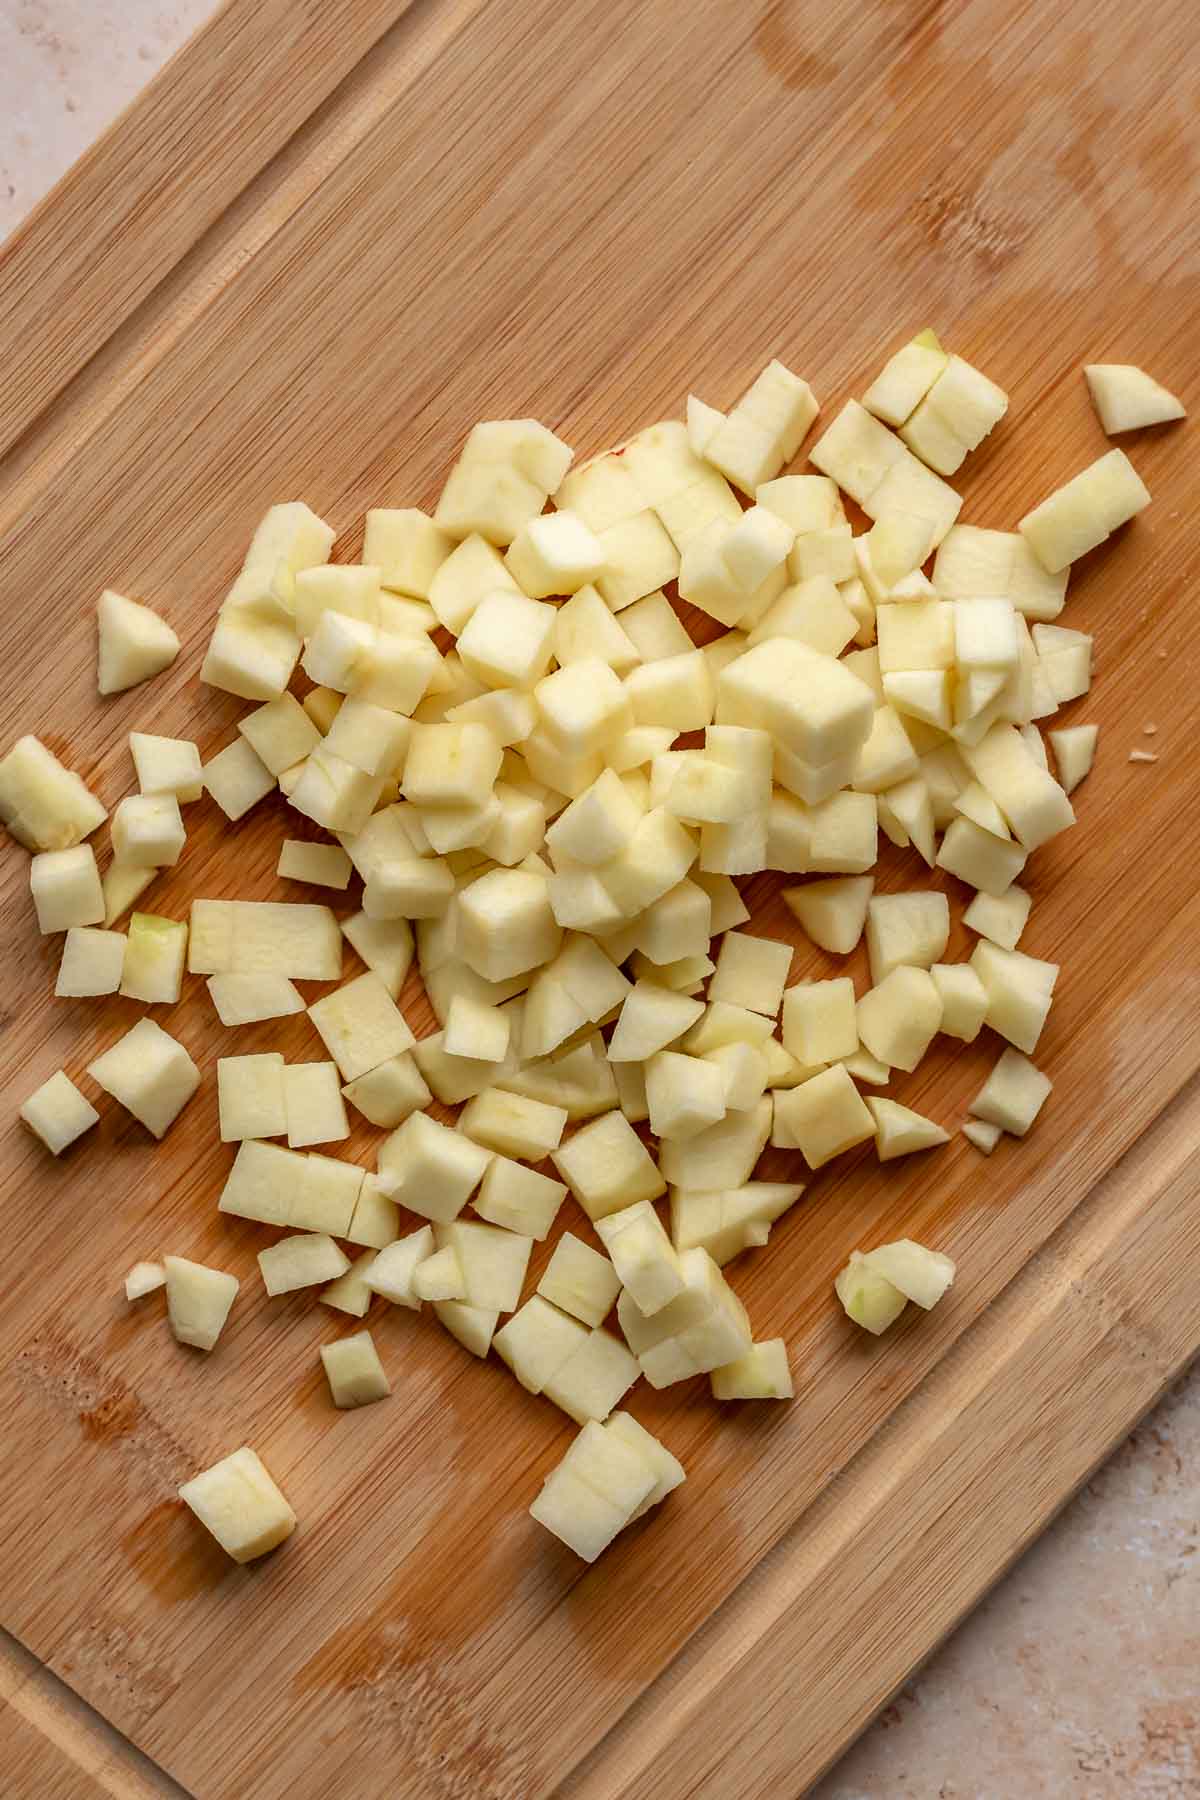 Diced apples on a cutting board.